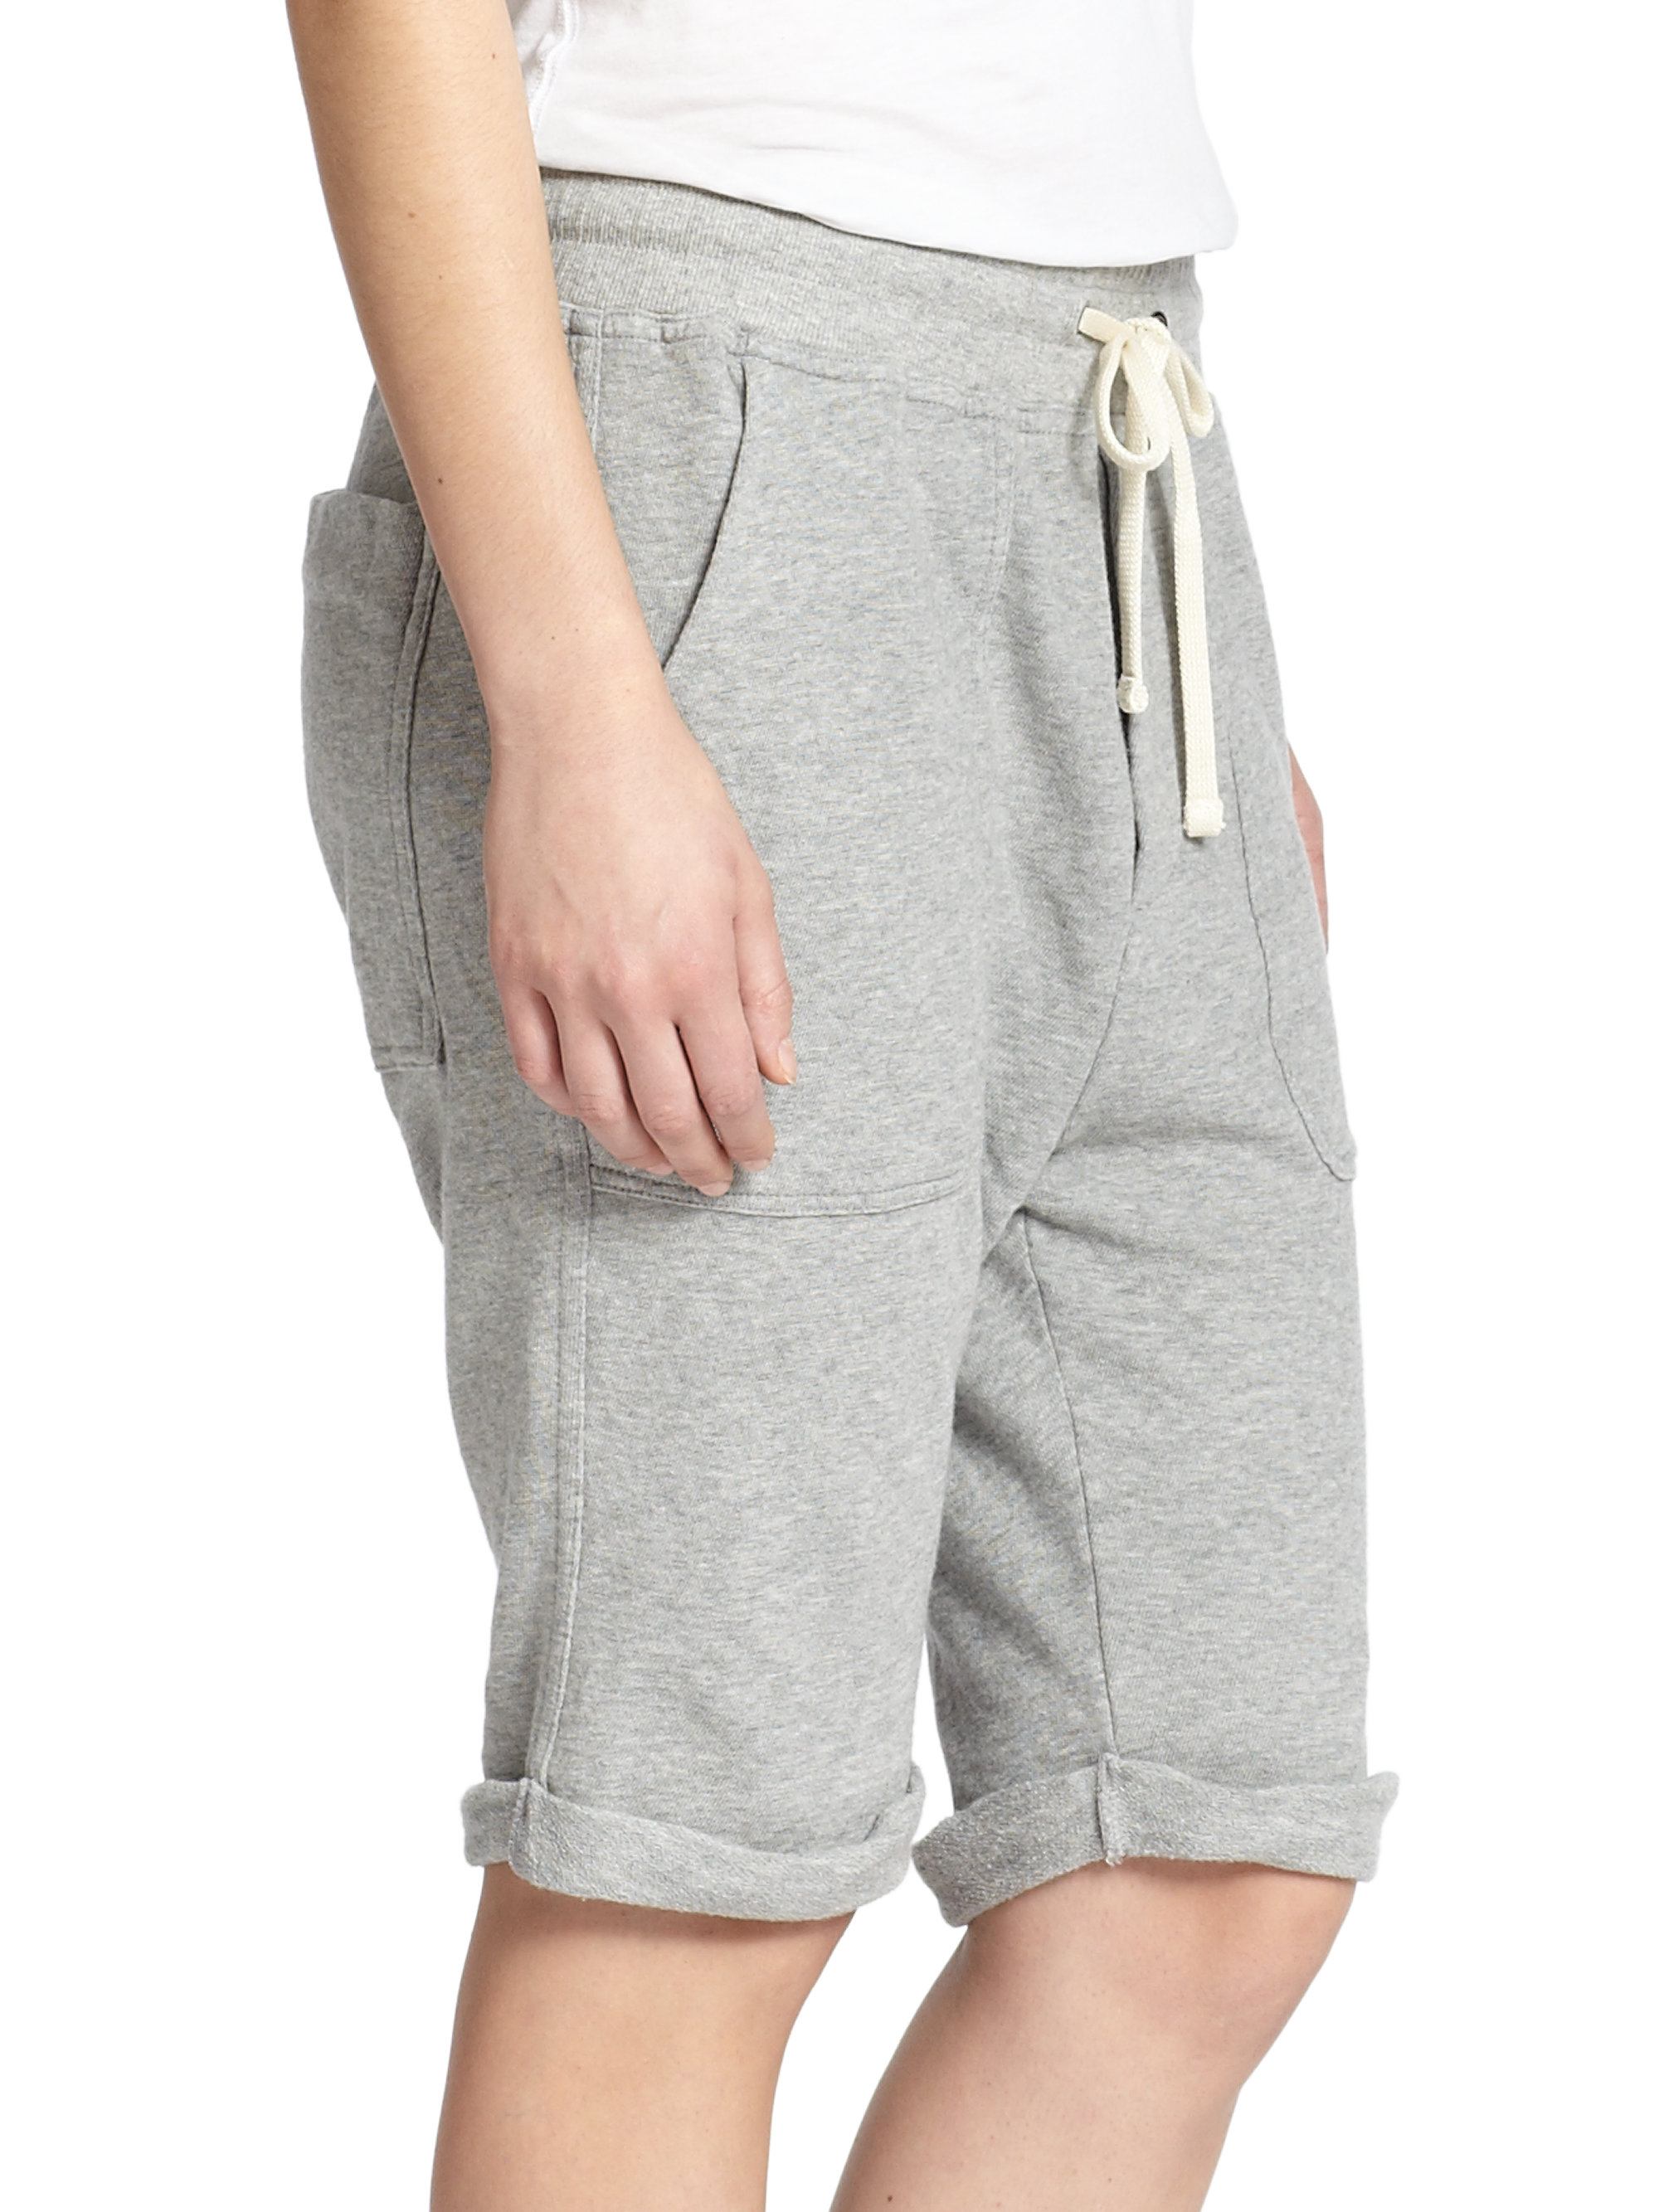 Lyst - James Perse Knit Bermuda Shorts in Gray